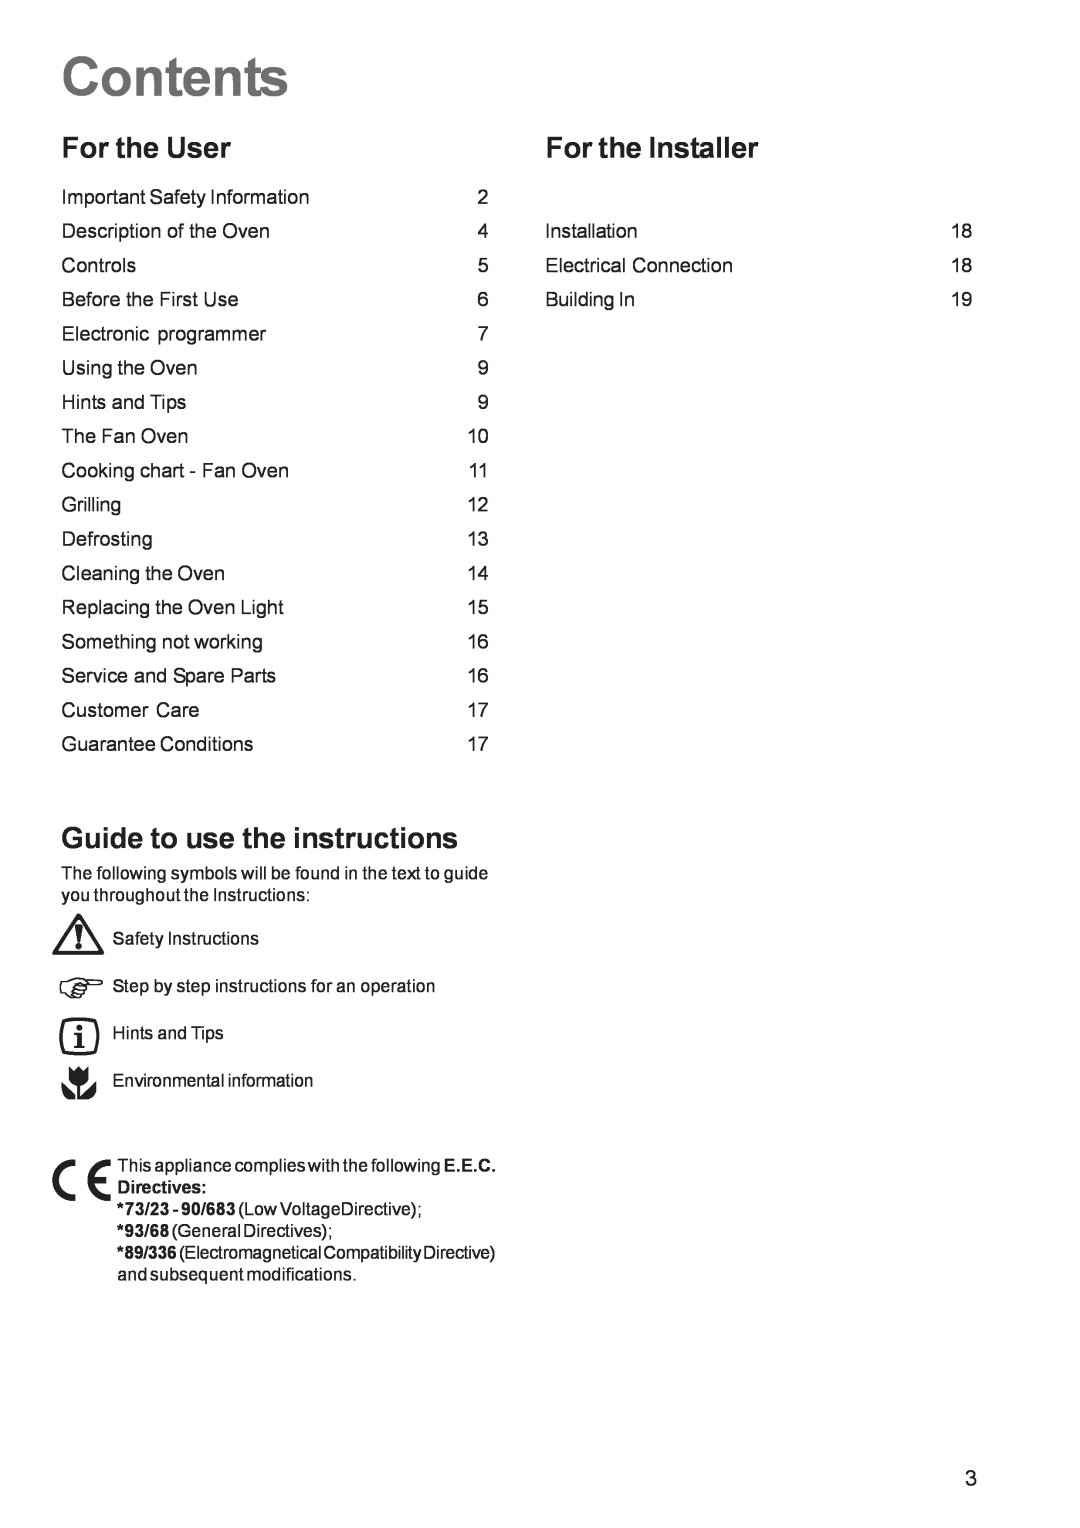 Zanussi ZBF 360 manual Contents, For the User, For the Installer, Guide to use the instructions 